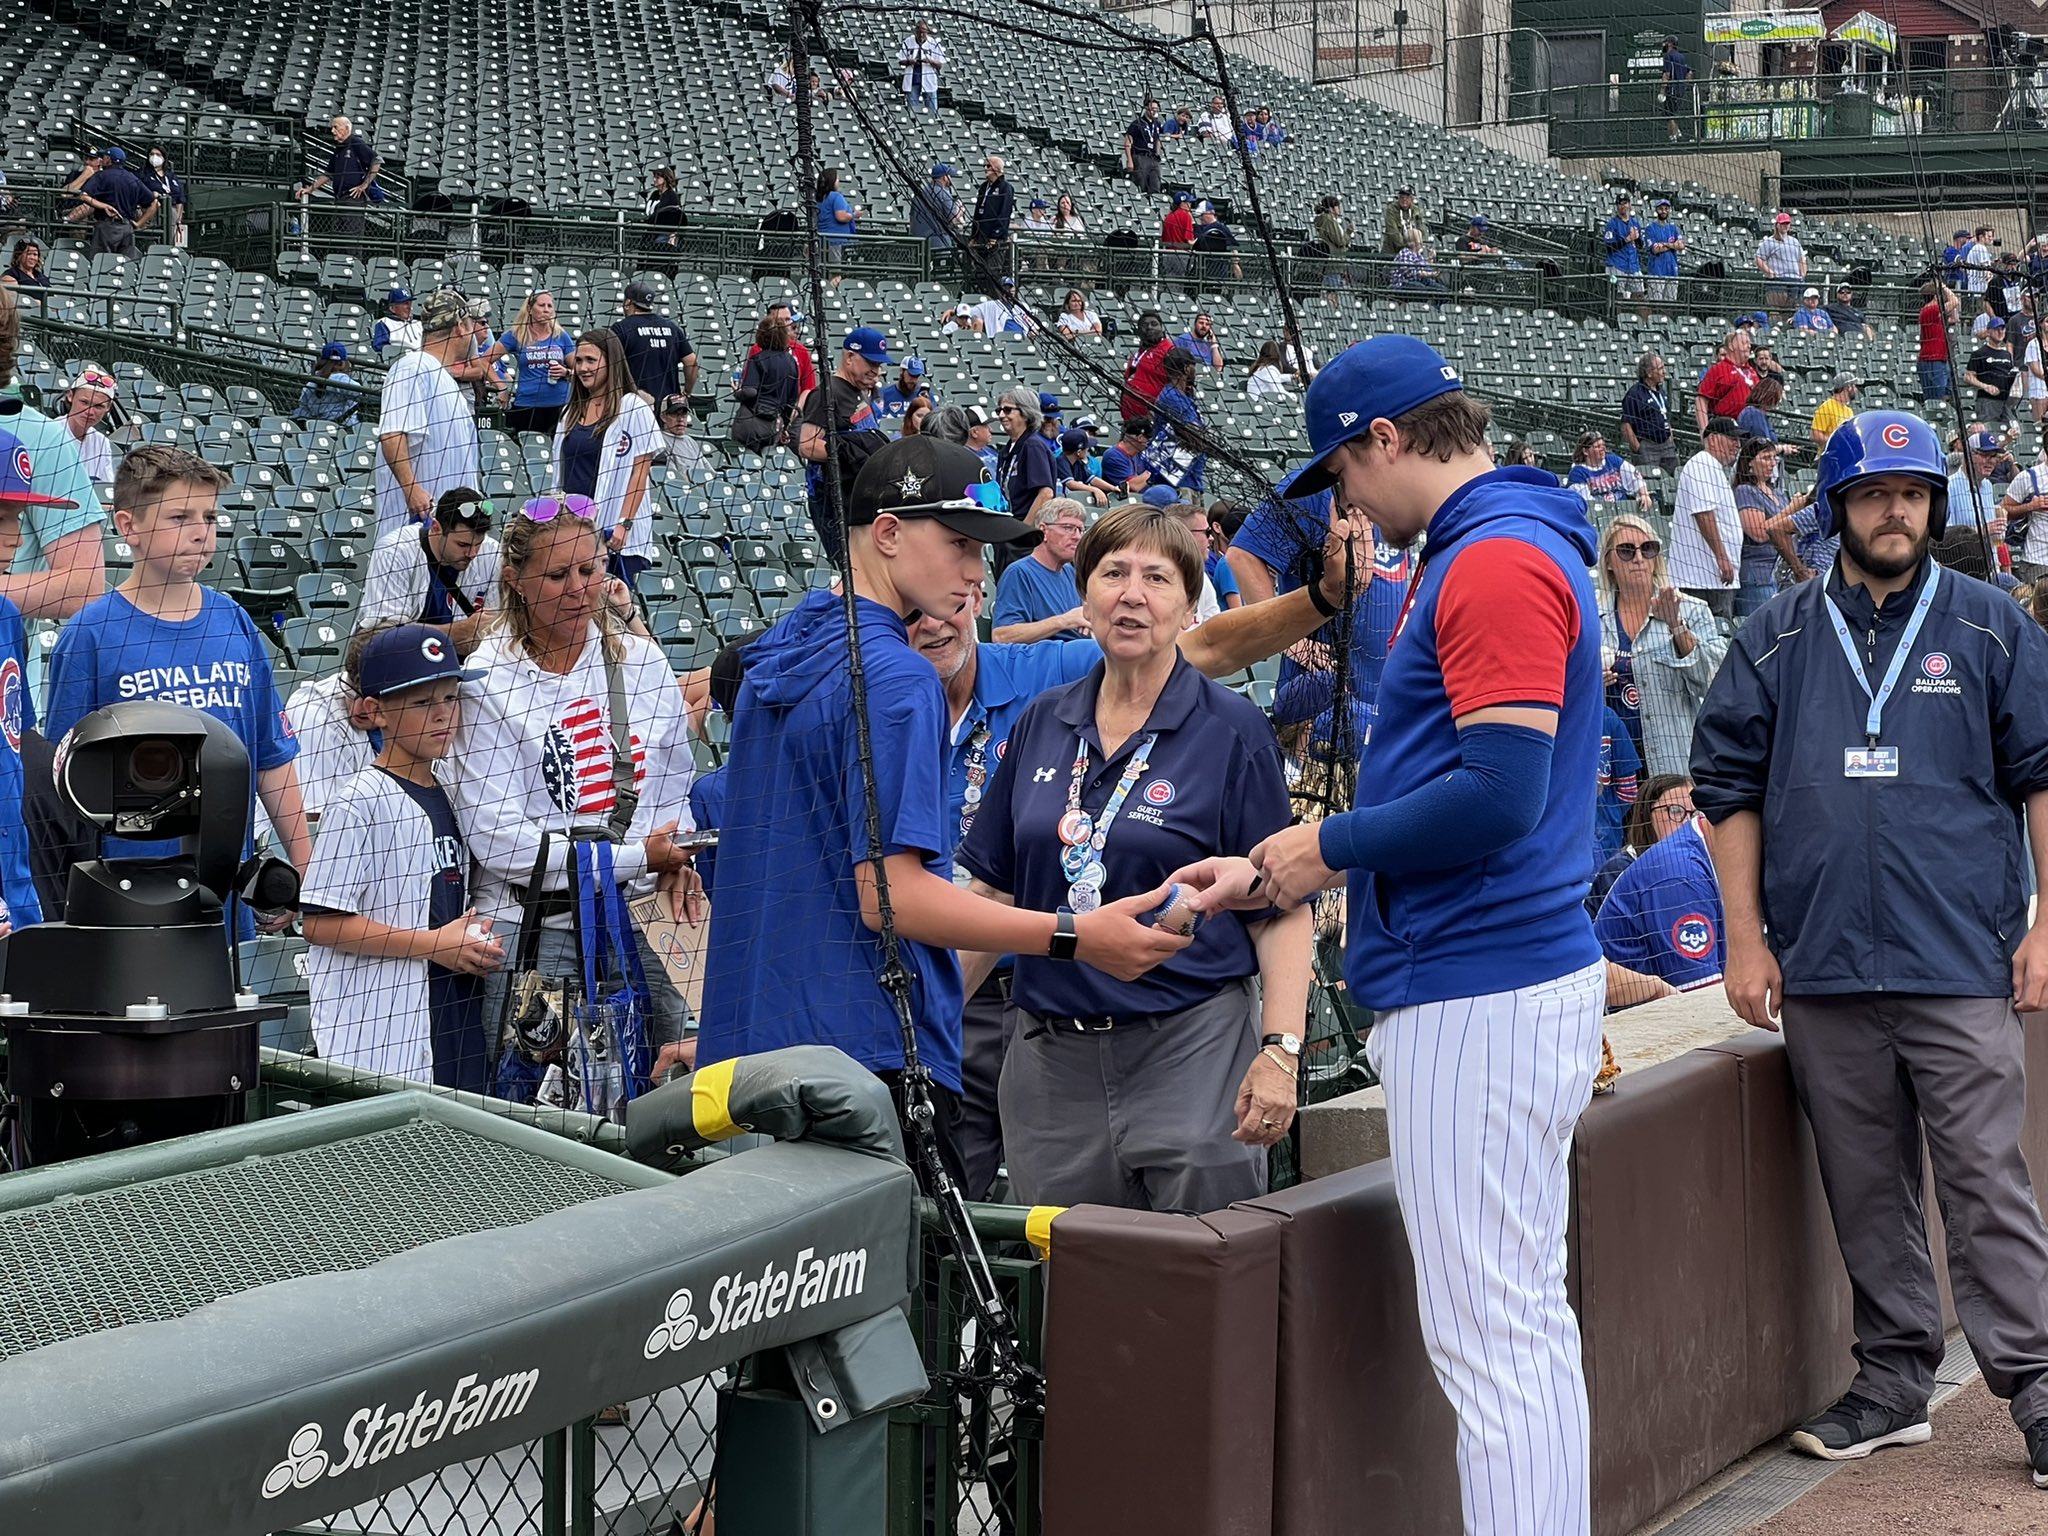 Andy Martínez on X: #Cubs pitcher Justin Steele has been here signing  autographs for at least 15 minutes. There's a line down the aisle of fans  waiting to snap pictures and have